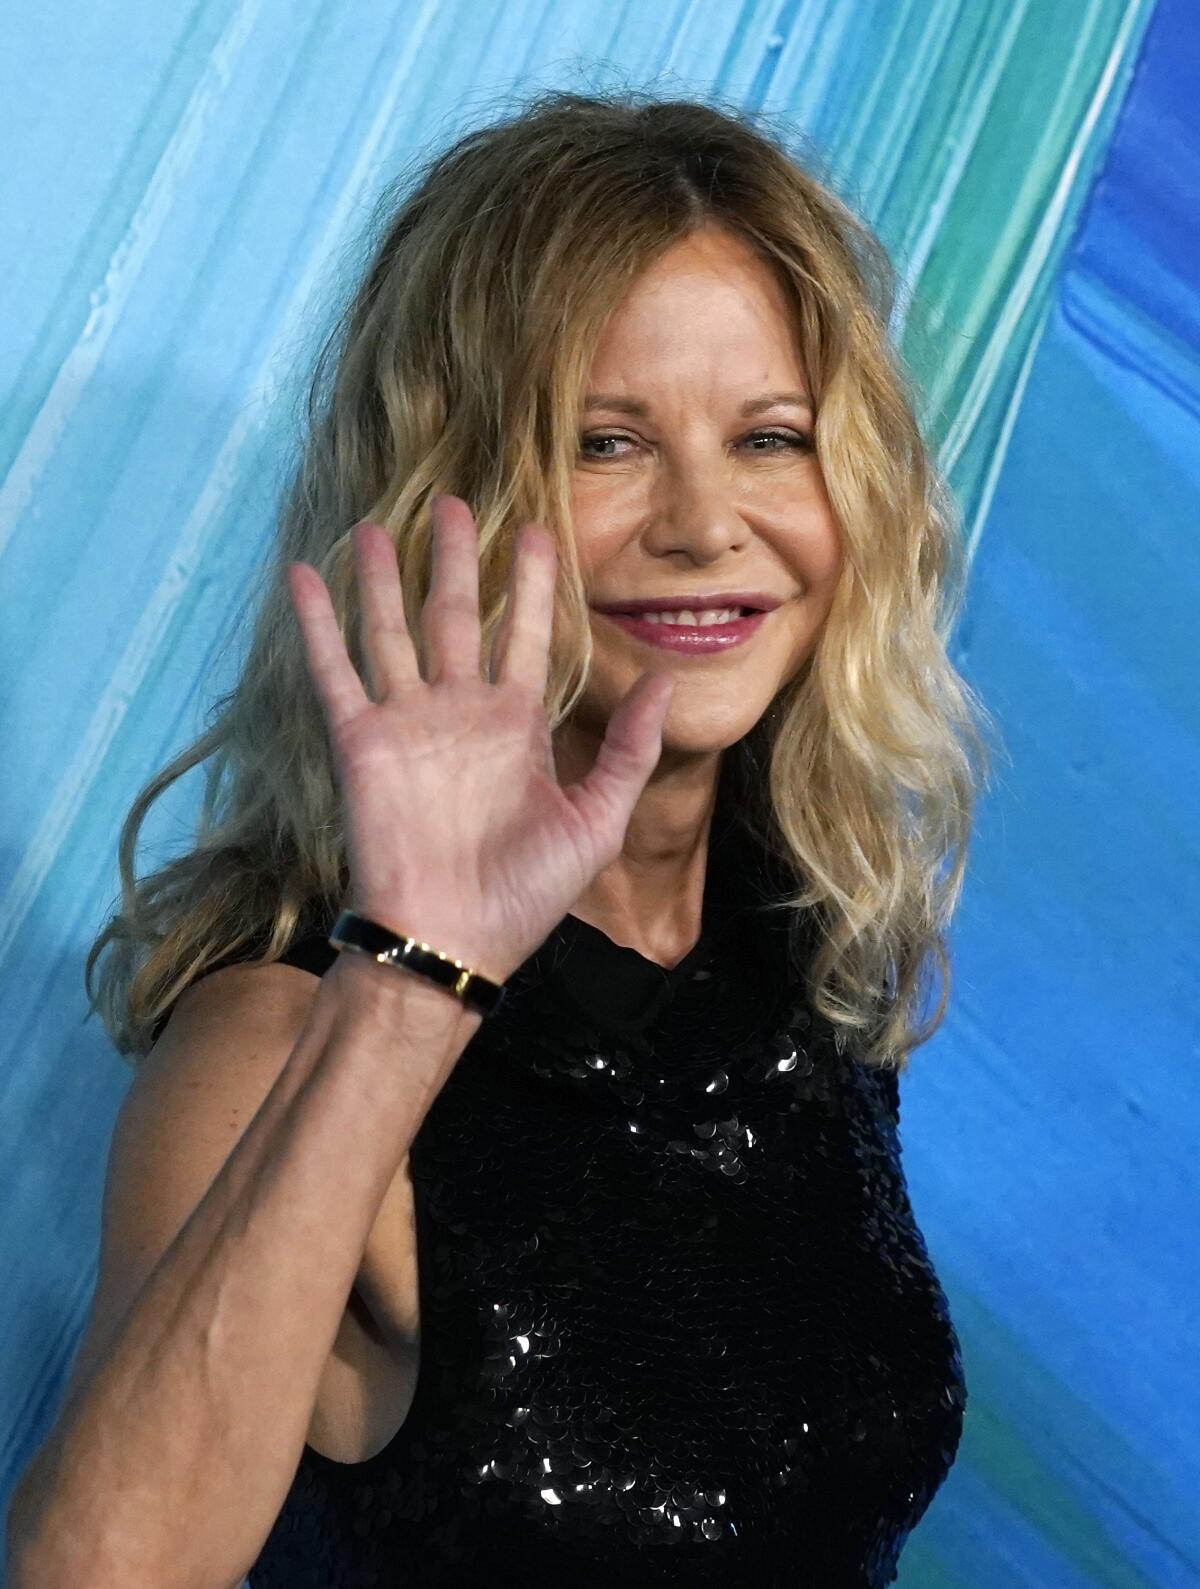 Meg Ryan waving and smiling while wearing black sequin dress at red carpet event